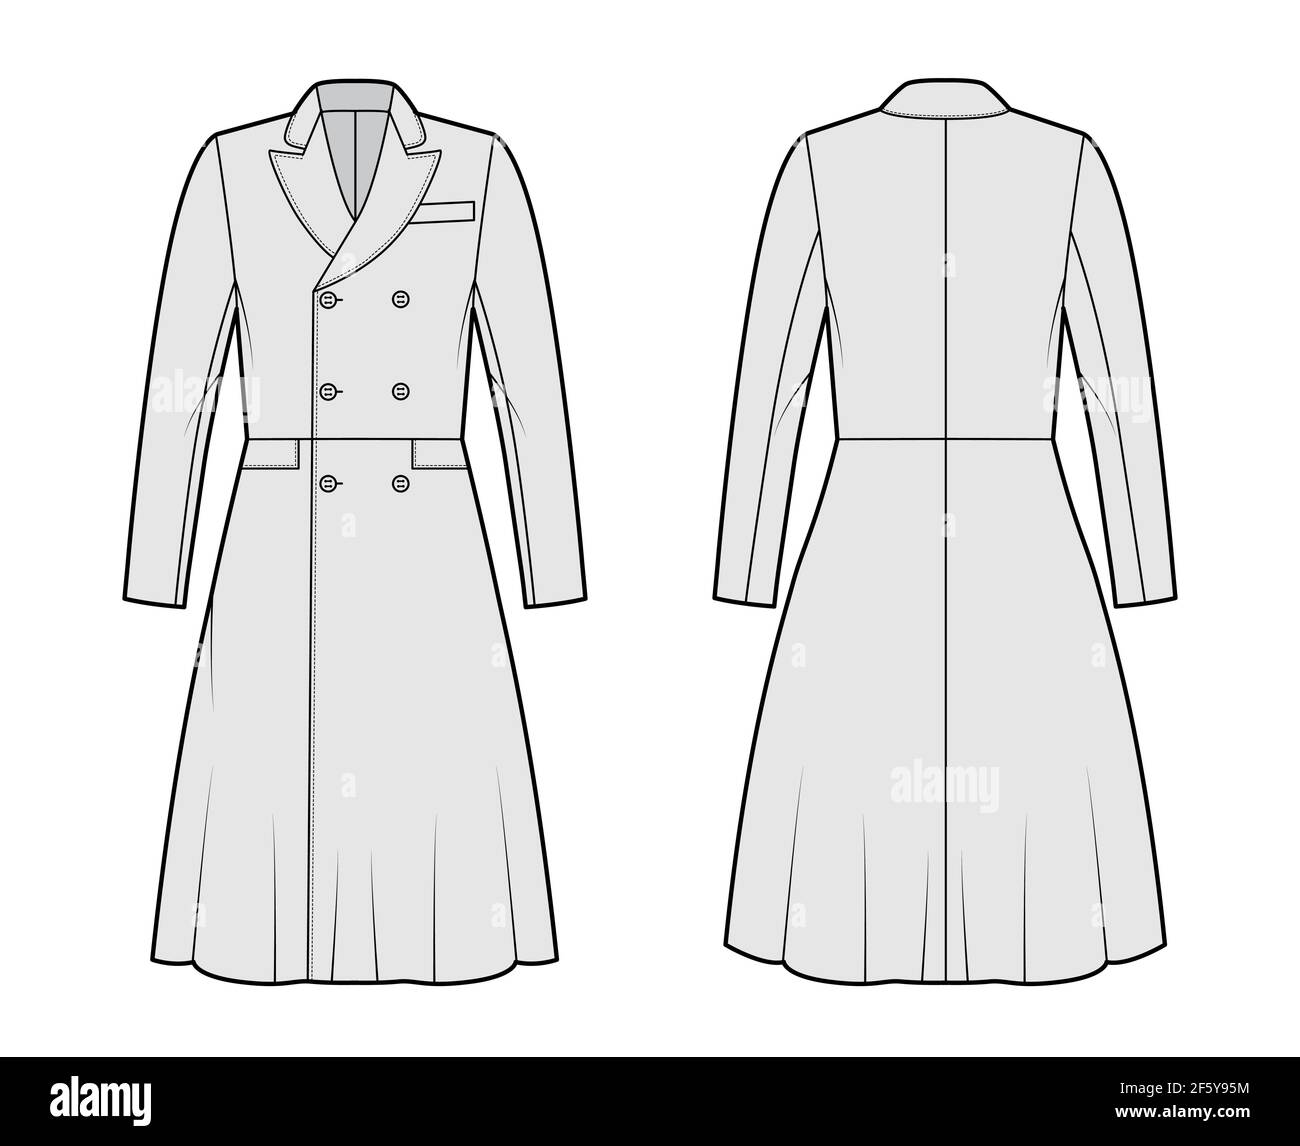 Frock coat technical fashion illustration with double breasted, fitted body, round collar peak, knee length, A-line skirt. Flat jacket template front, back, grey color style. Women, men top CAD mockup Stock Vector